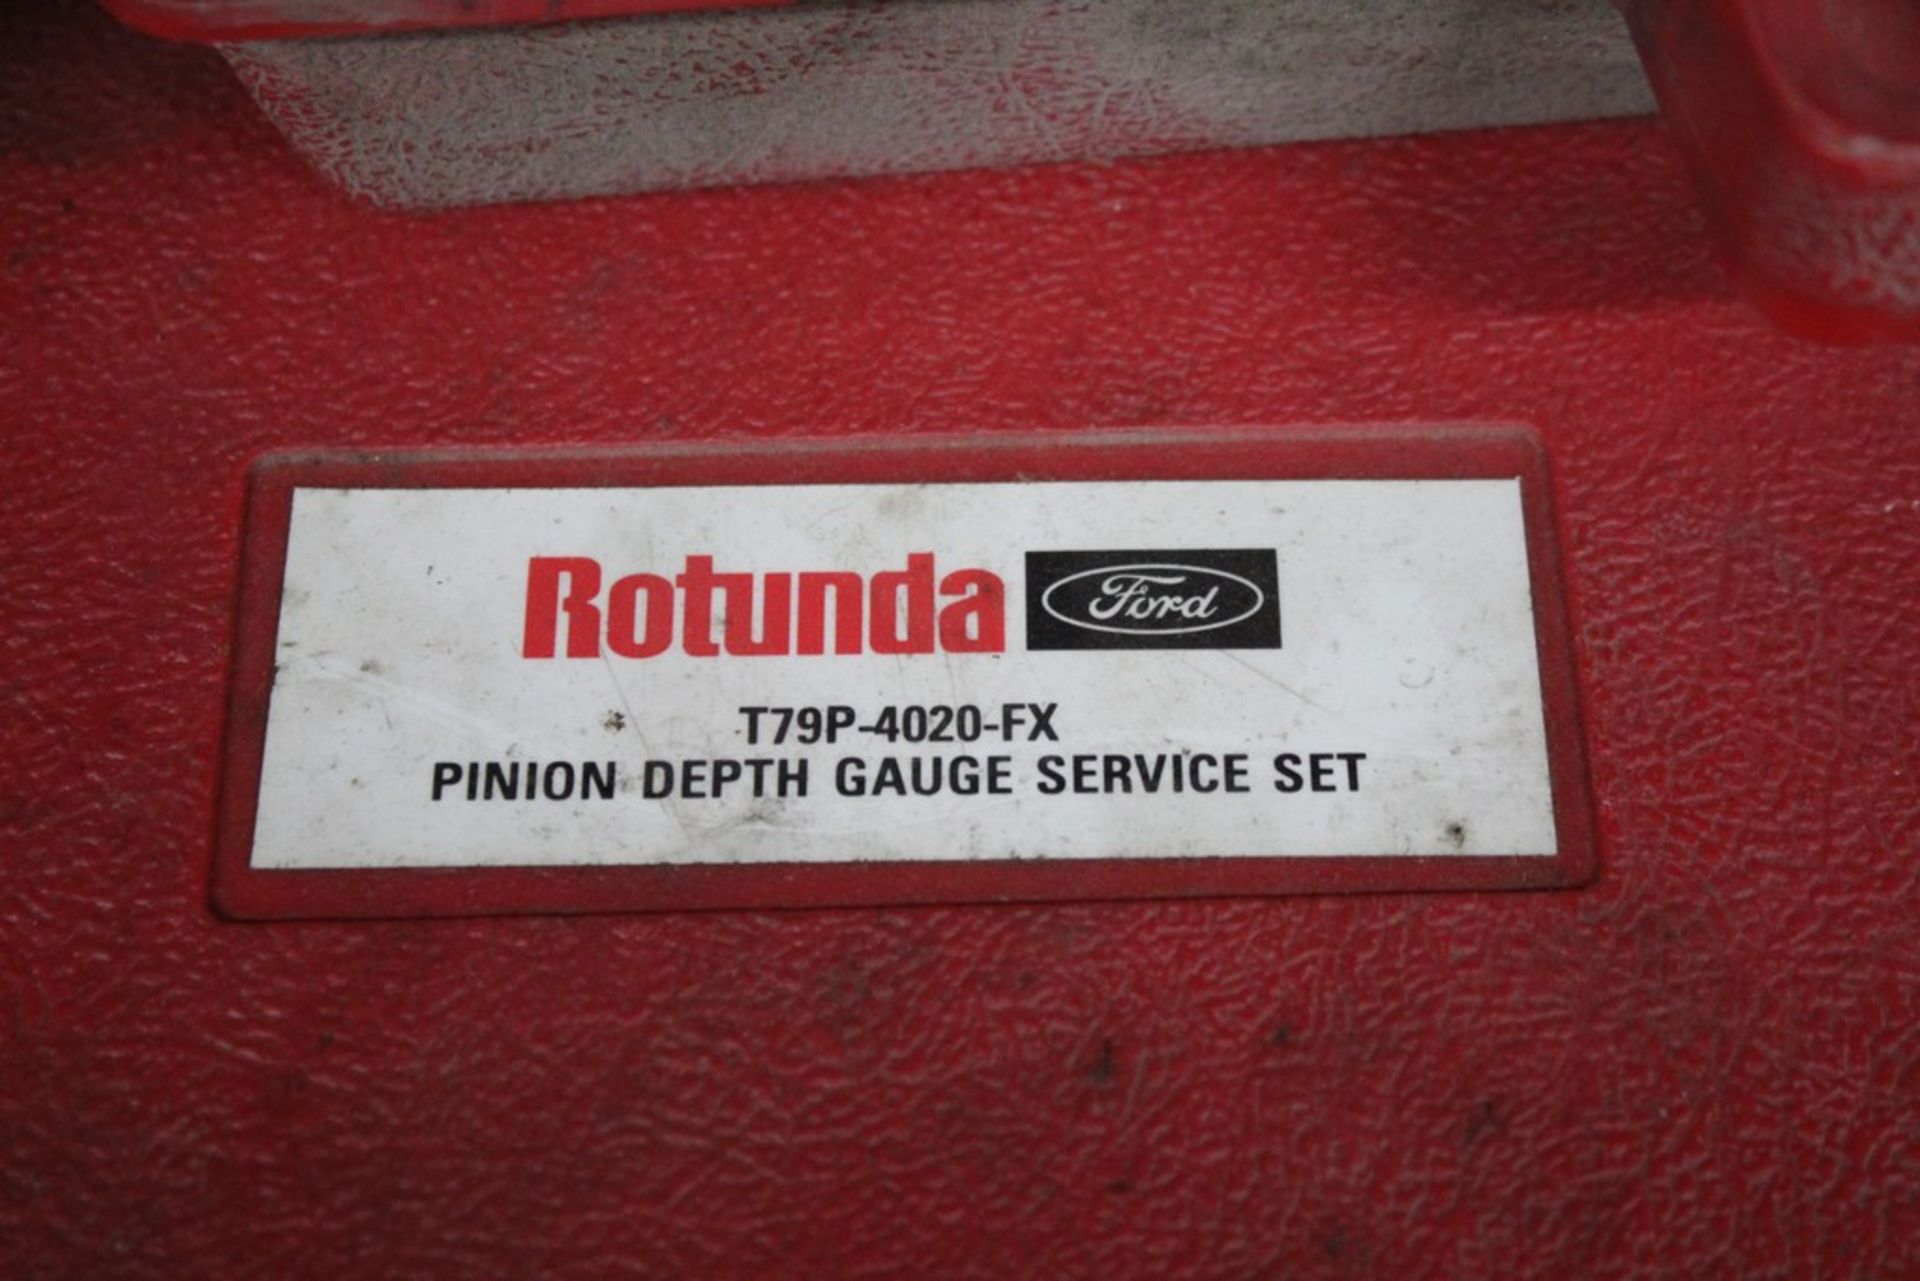 ASSORTED 1979 FORD ROTUNDA ESSENTIAL SERVICE TOOL SETS IN TWO CASES - Image 3 of 3